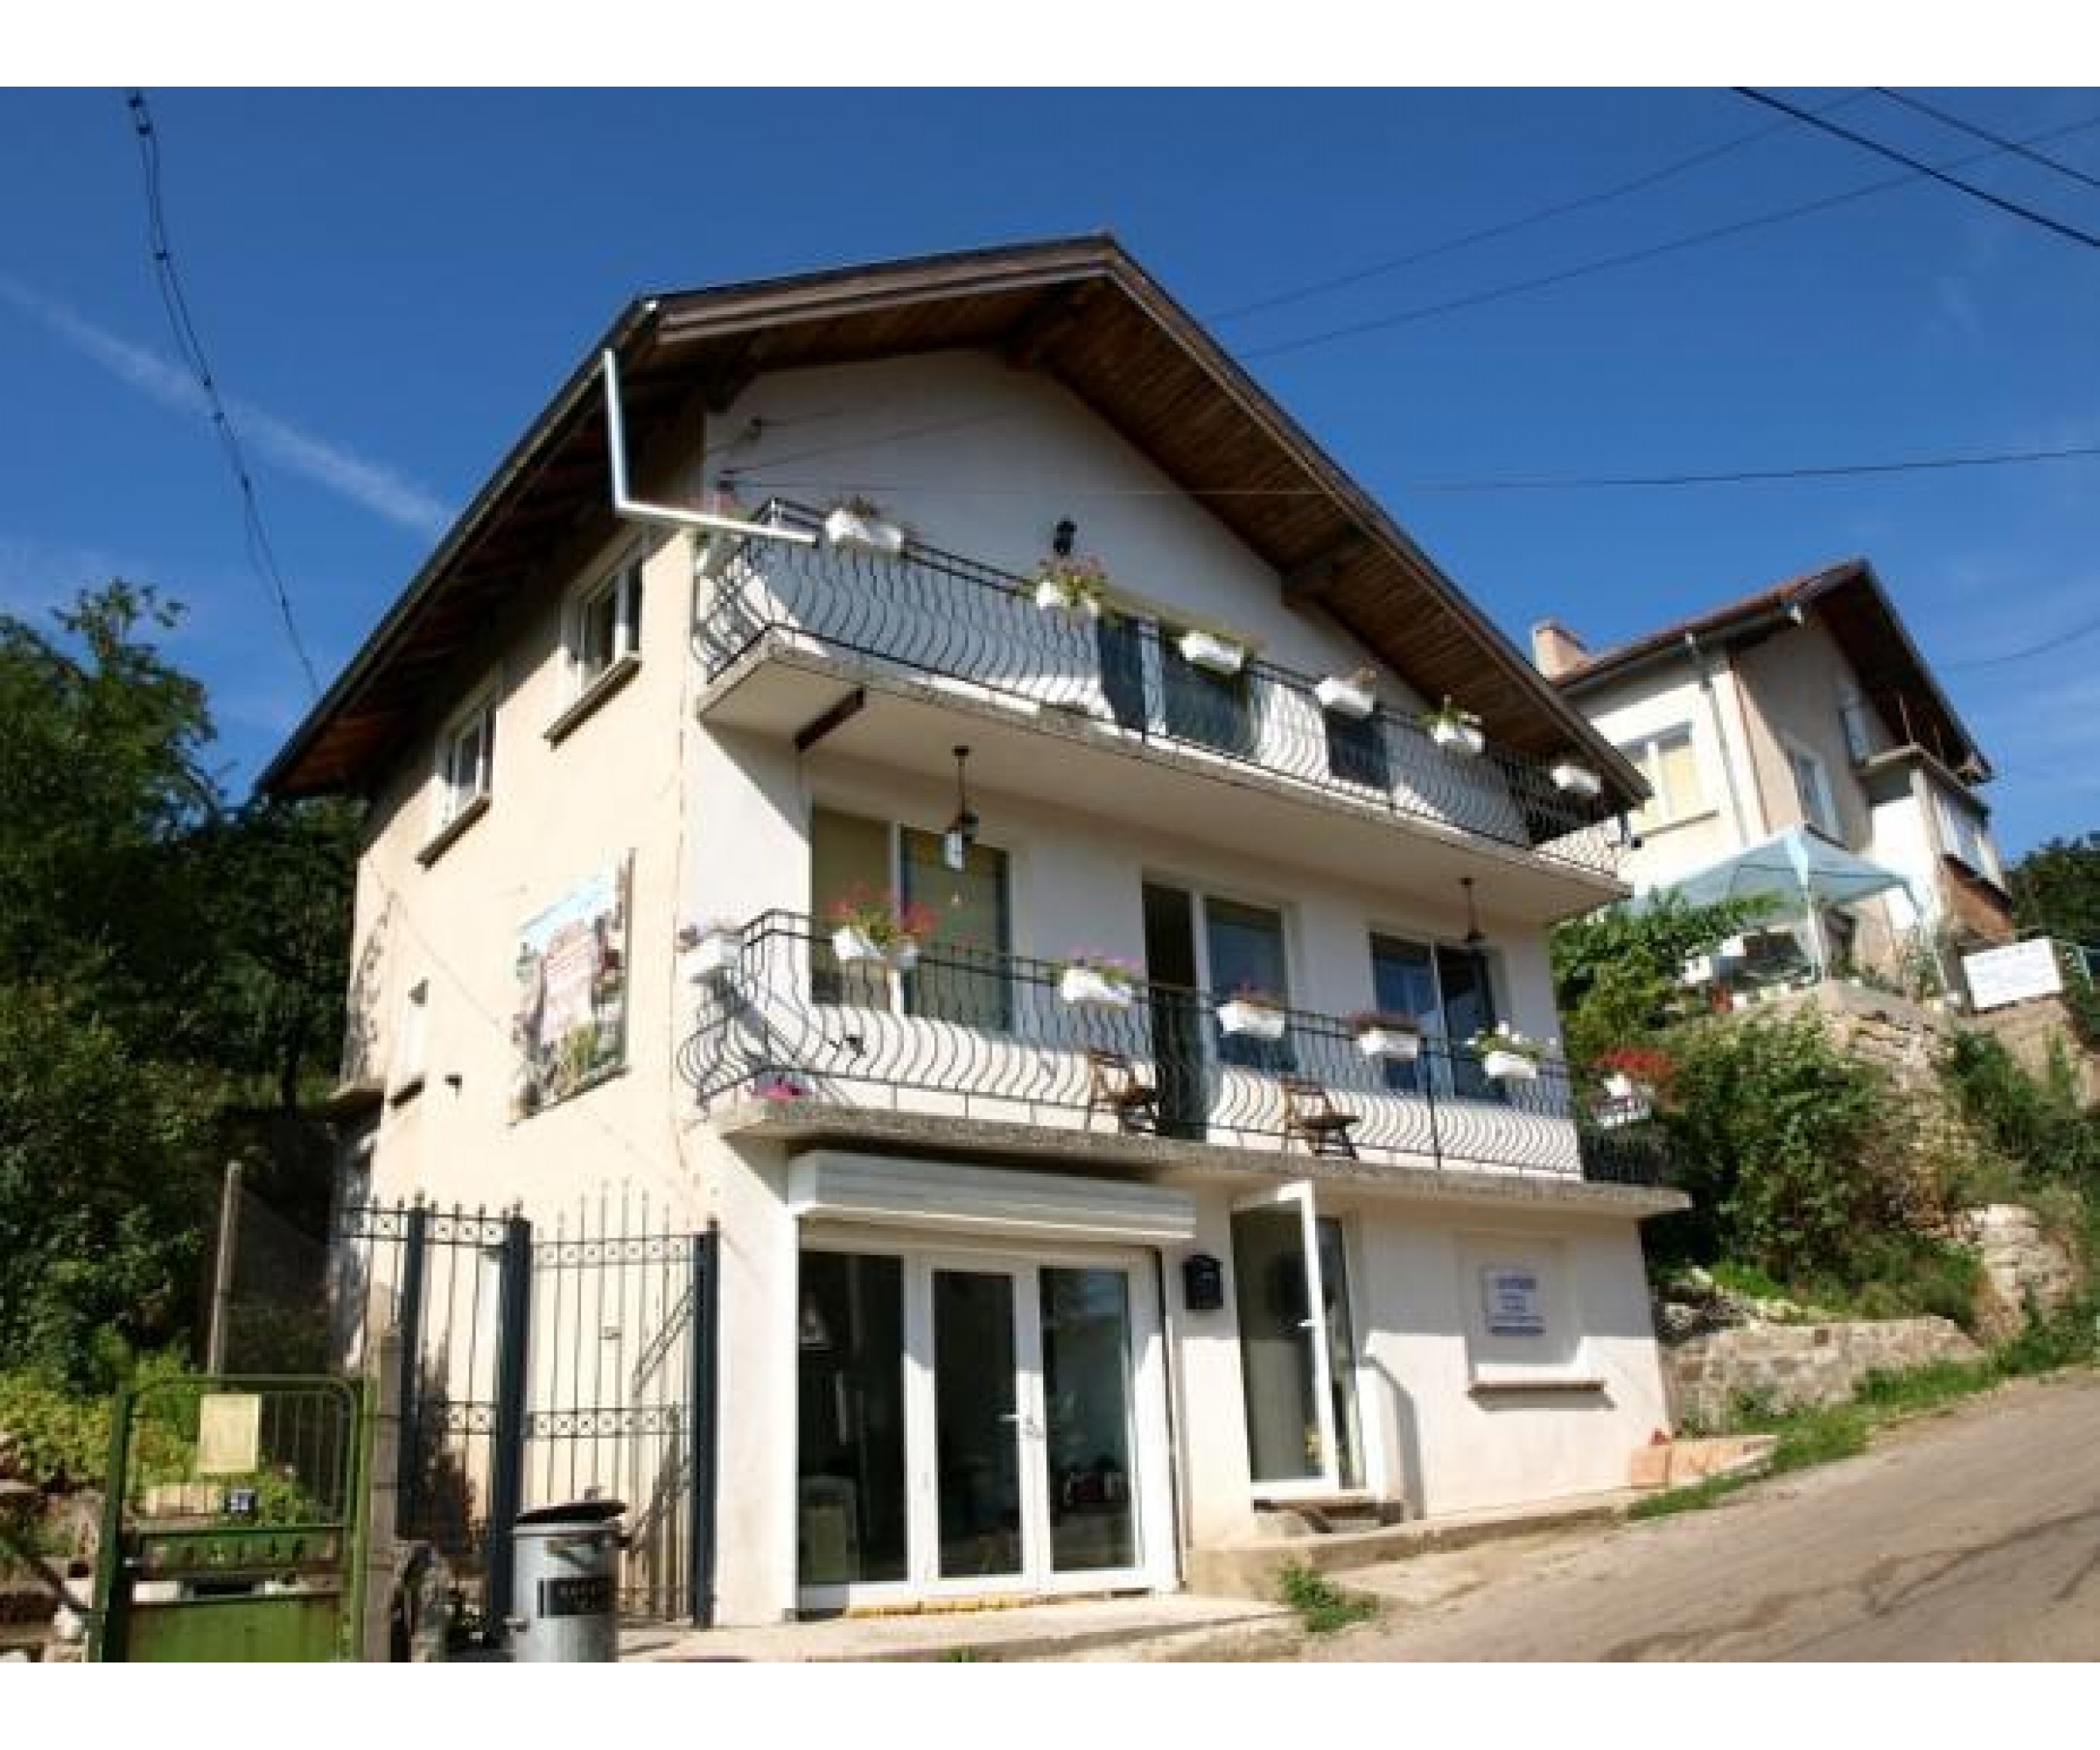 Three-storey house in the town of Belogradchik